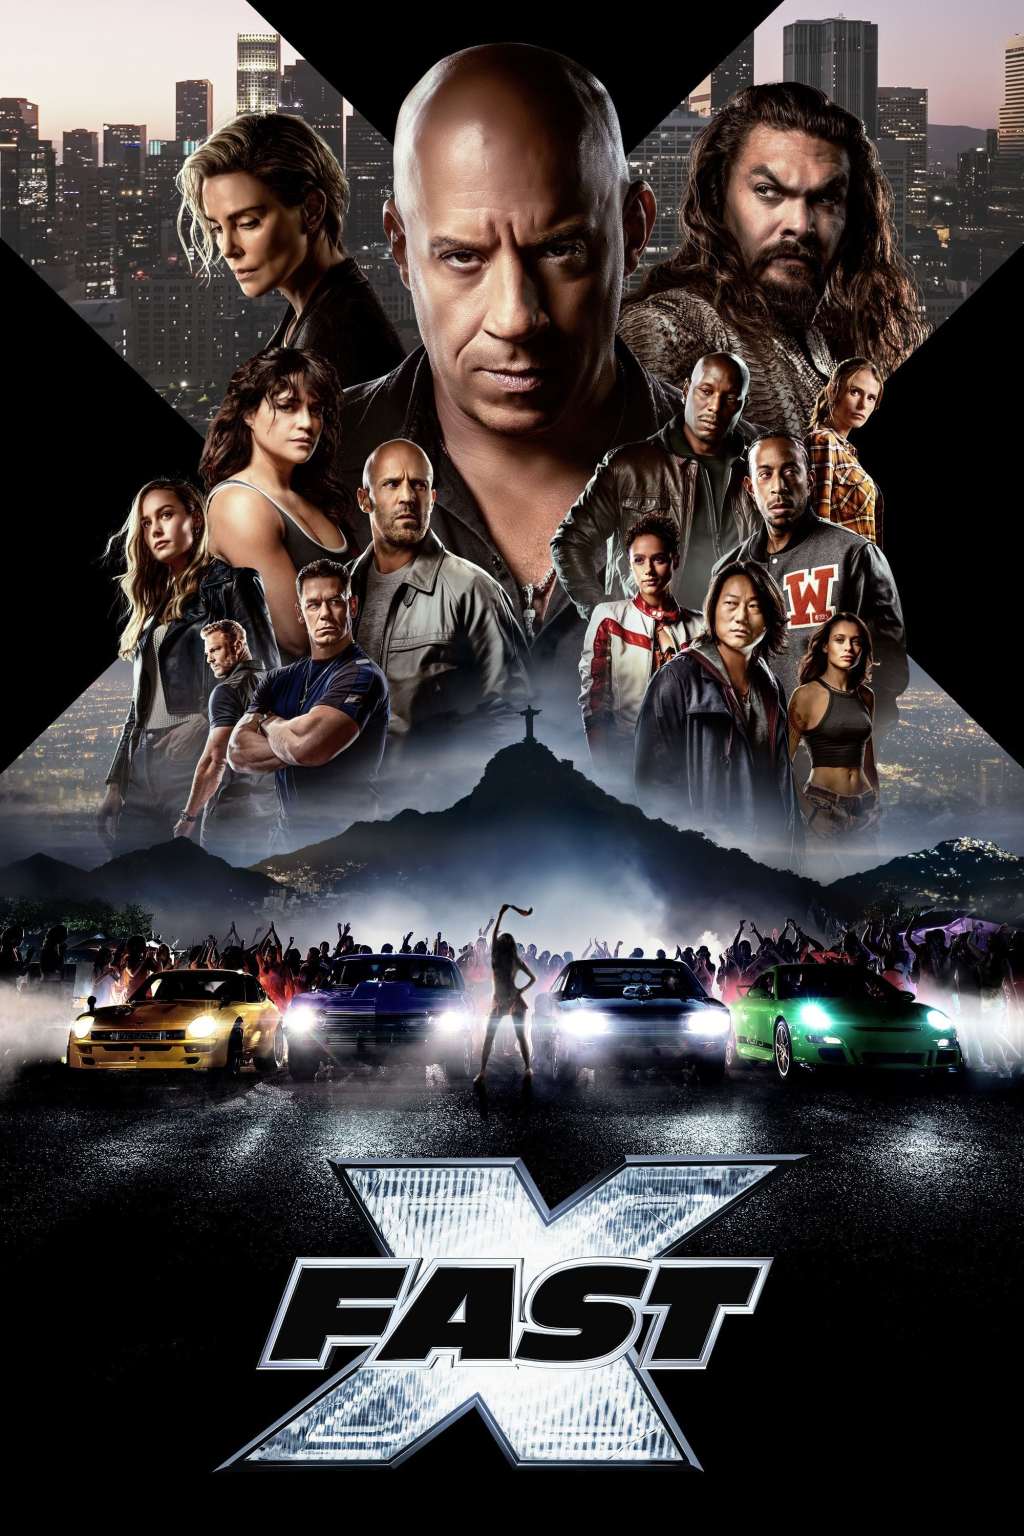 Fast X – Completely ludicrous but fun movie.